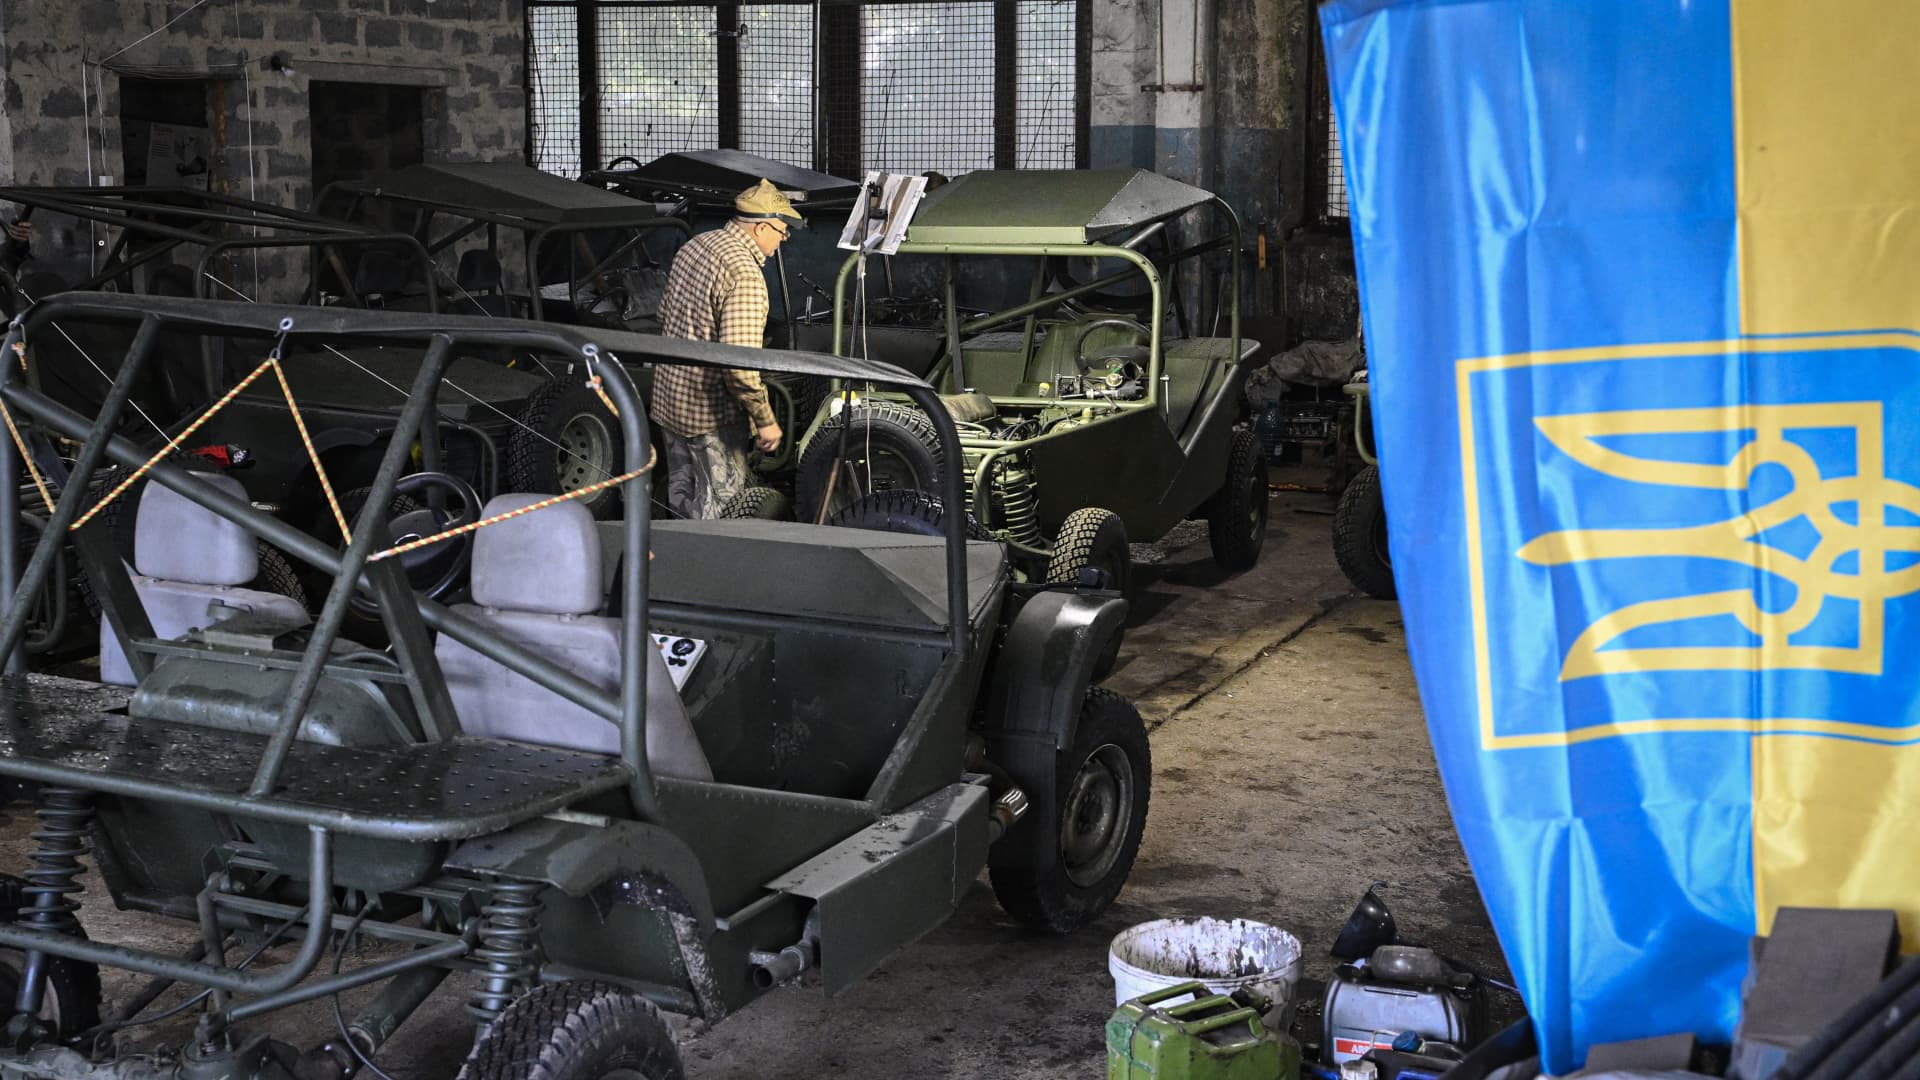 A workers assembles a buggy in a workshop in Kryvyi Rih on September 29, 2022, amid the Russian invasion of Ukraine.